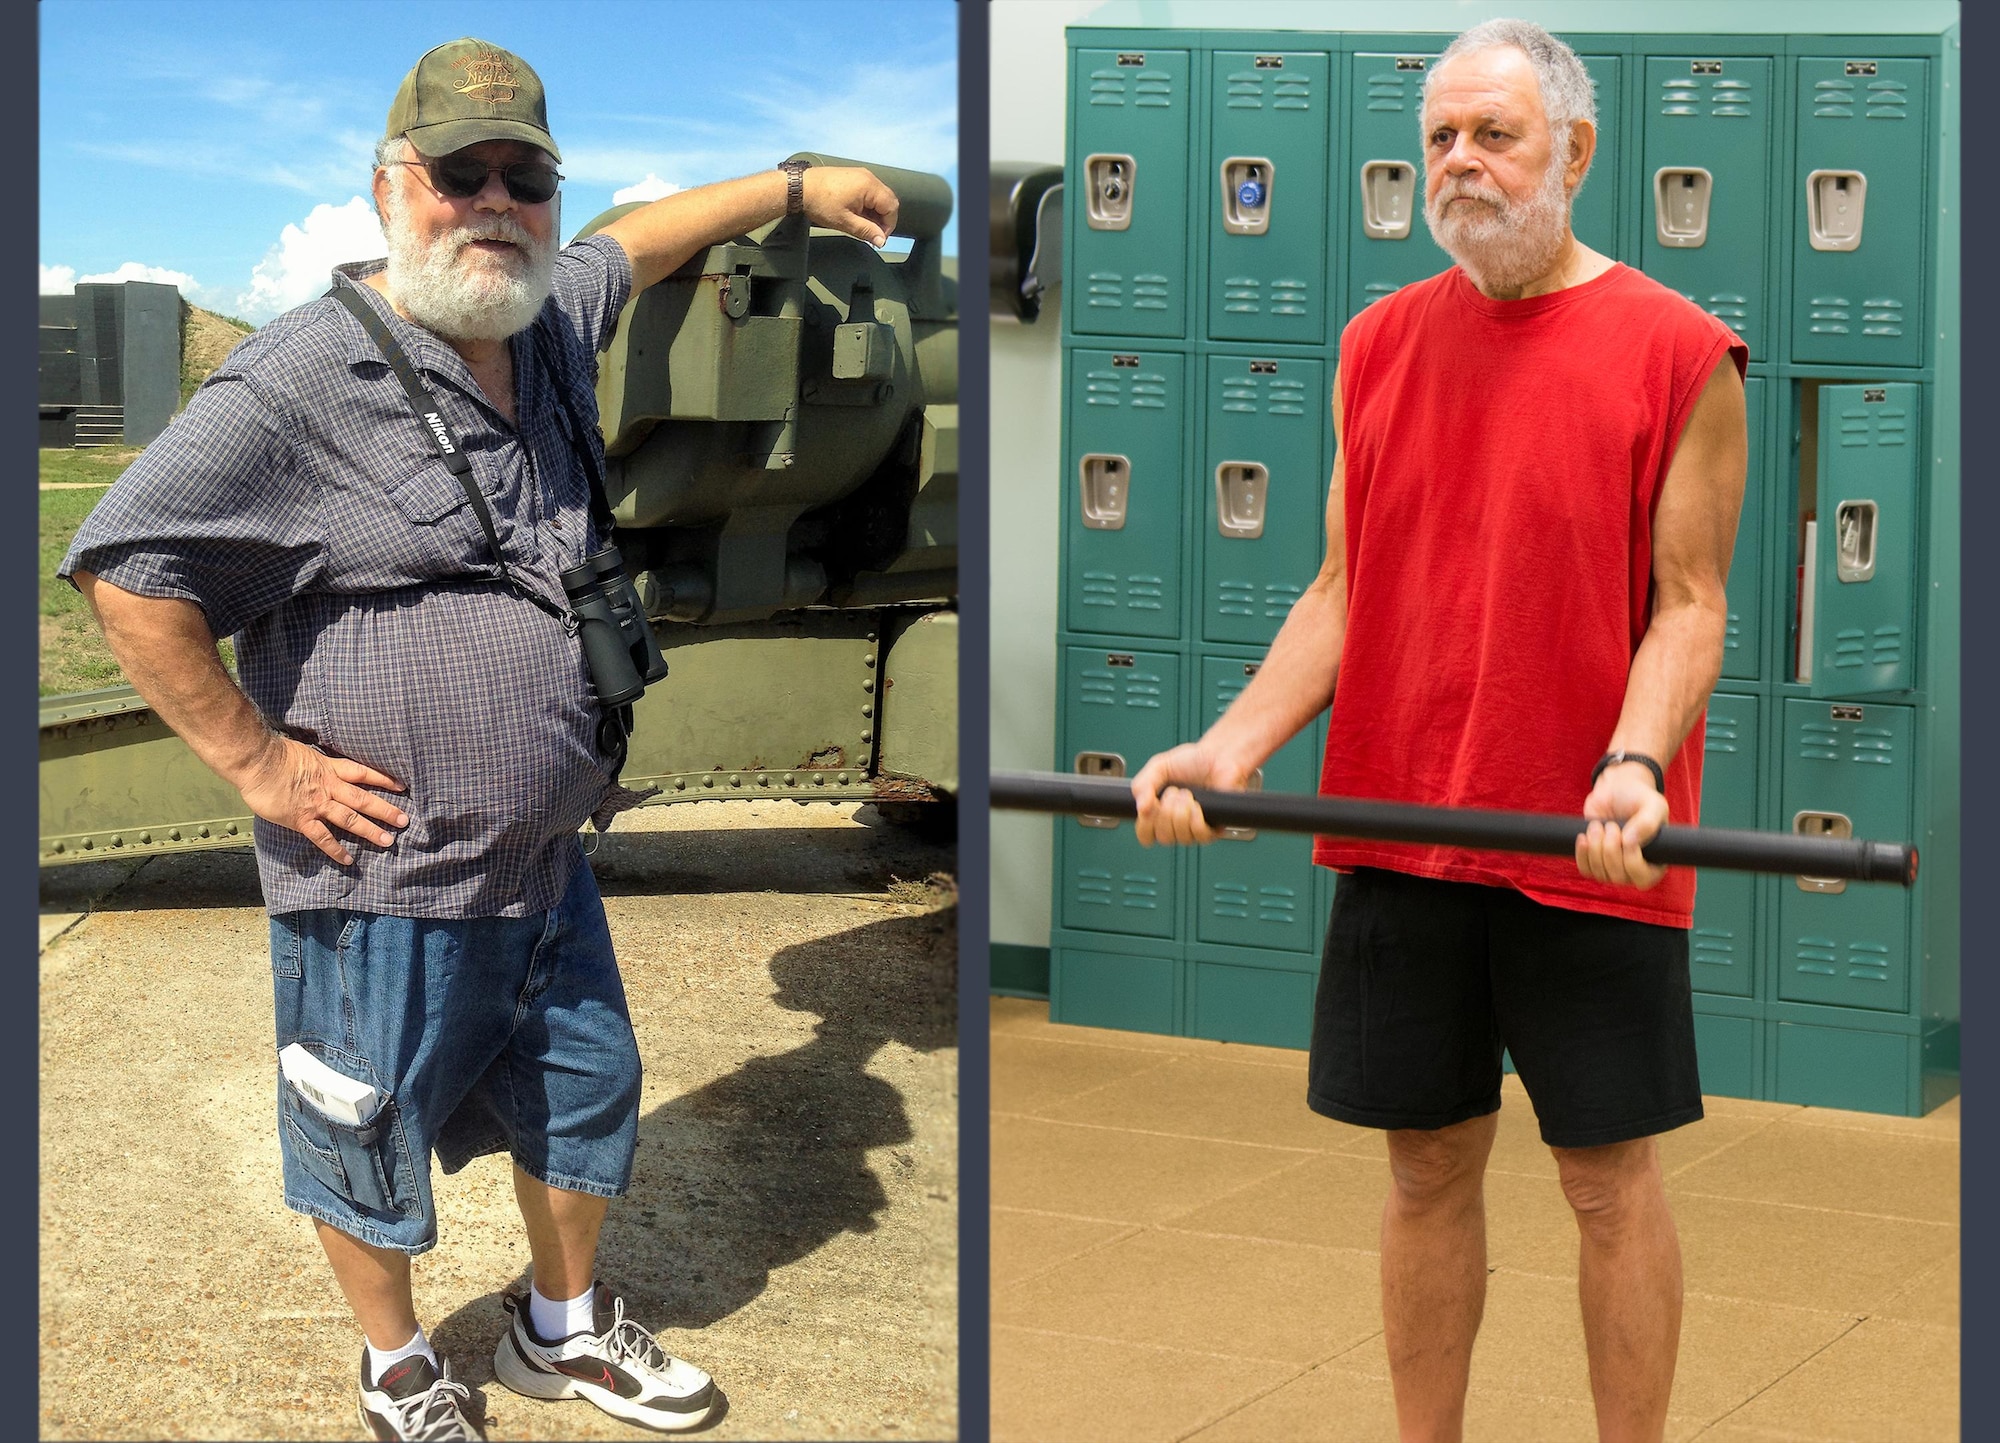 Retired Master Sgt Steve Fleming has lost over 140 pounds since starting his weight loss journey in May 2015. Fleming was 320 pounds at left, and 189 pounds at right. (Graphic photo) 